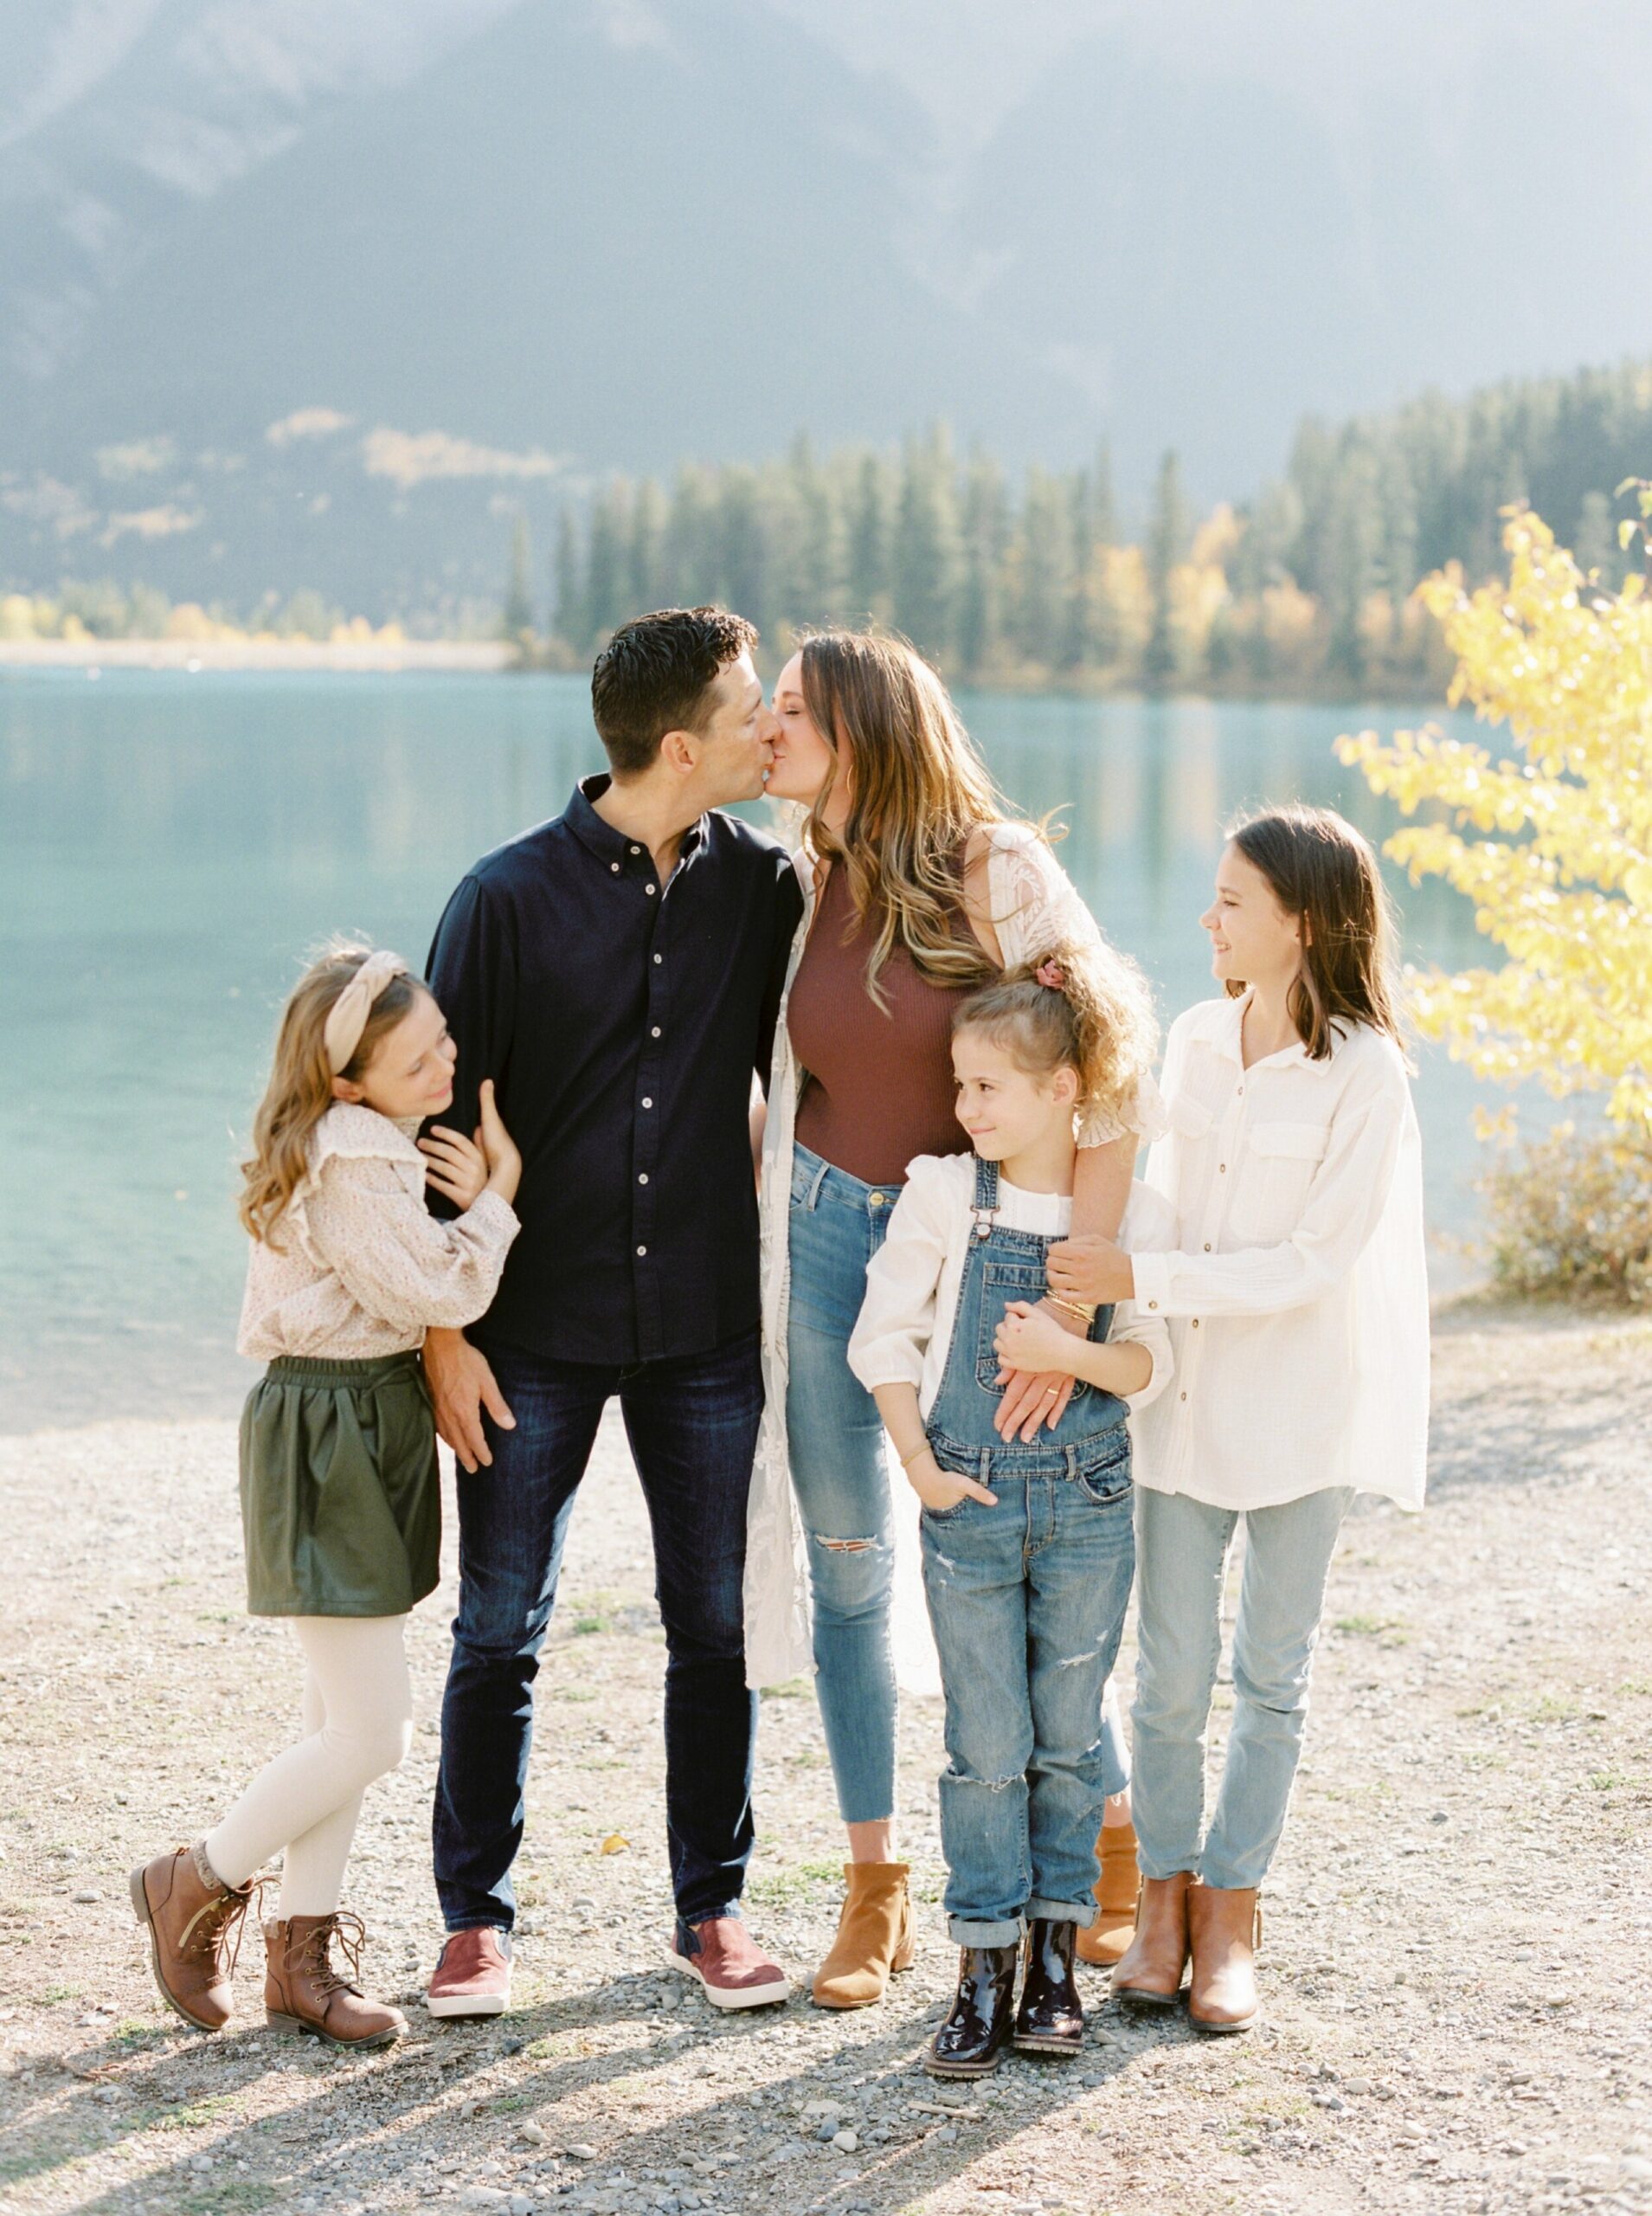  outfit inspiration for fall famliy portraits | Calgary fall family photographers | family photo session ideas and poses with older kids | film photographer Justine Milton 